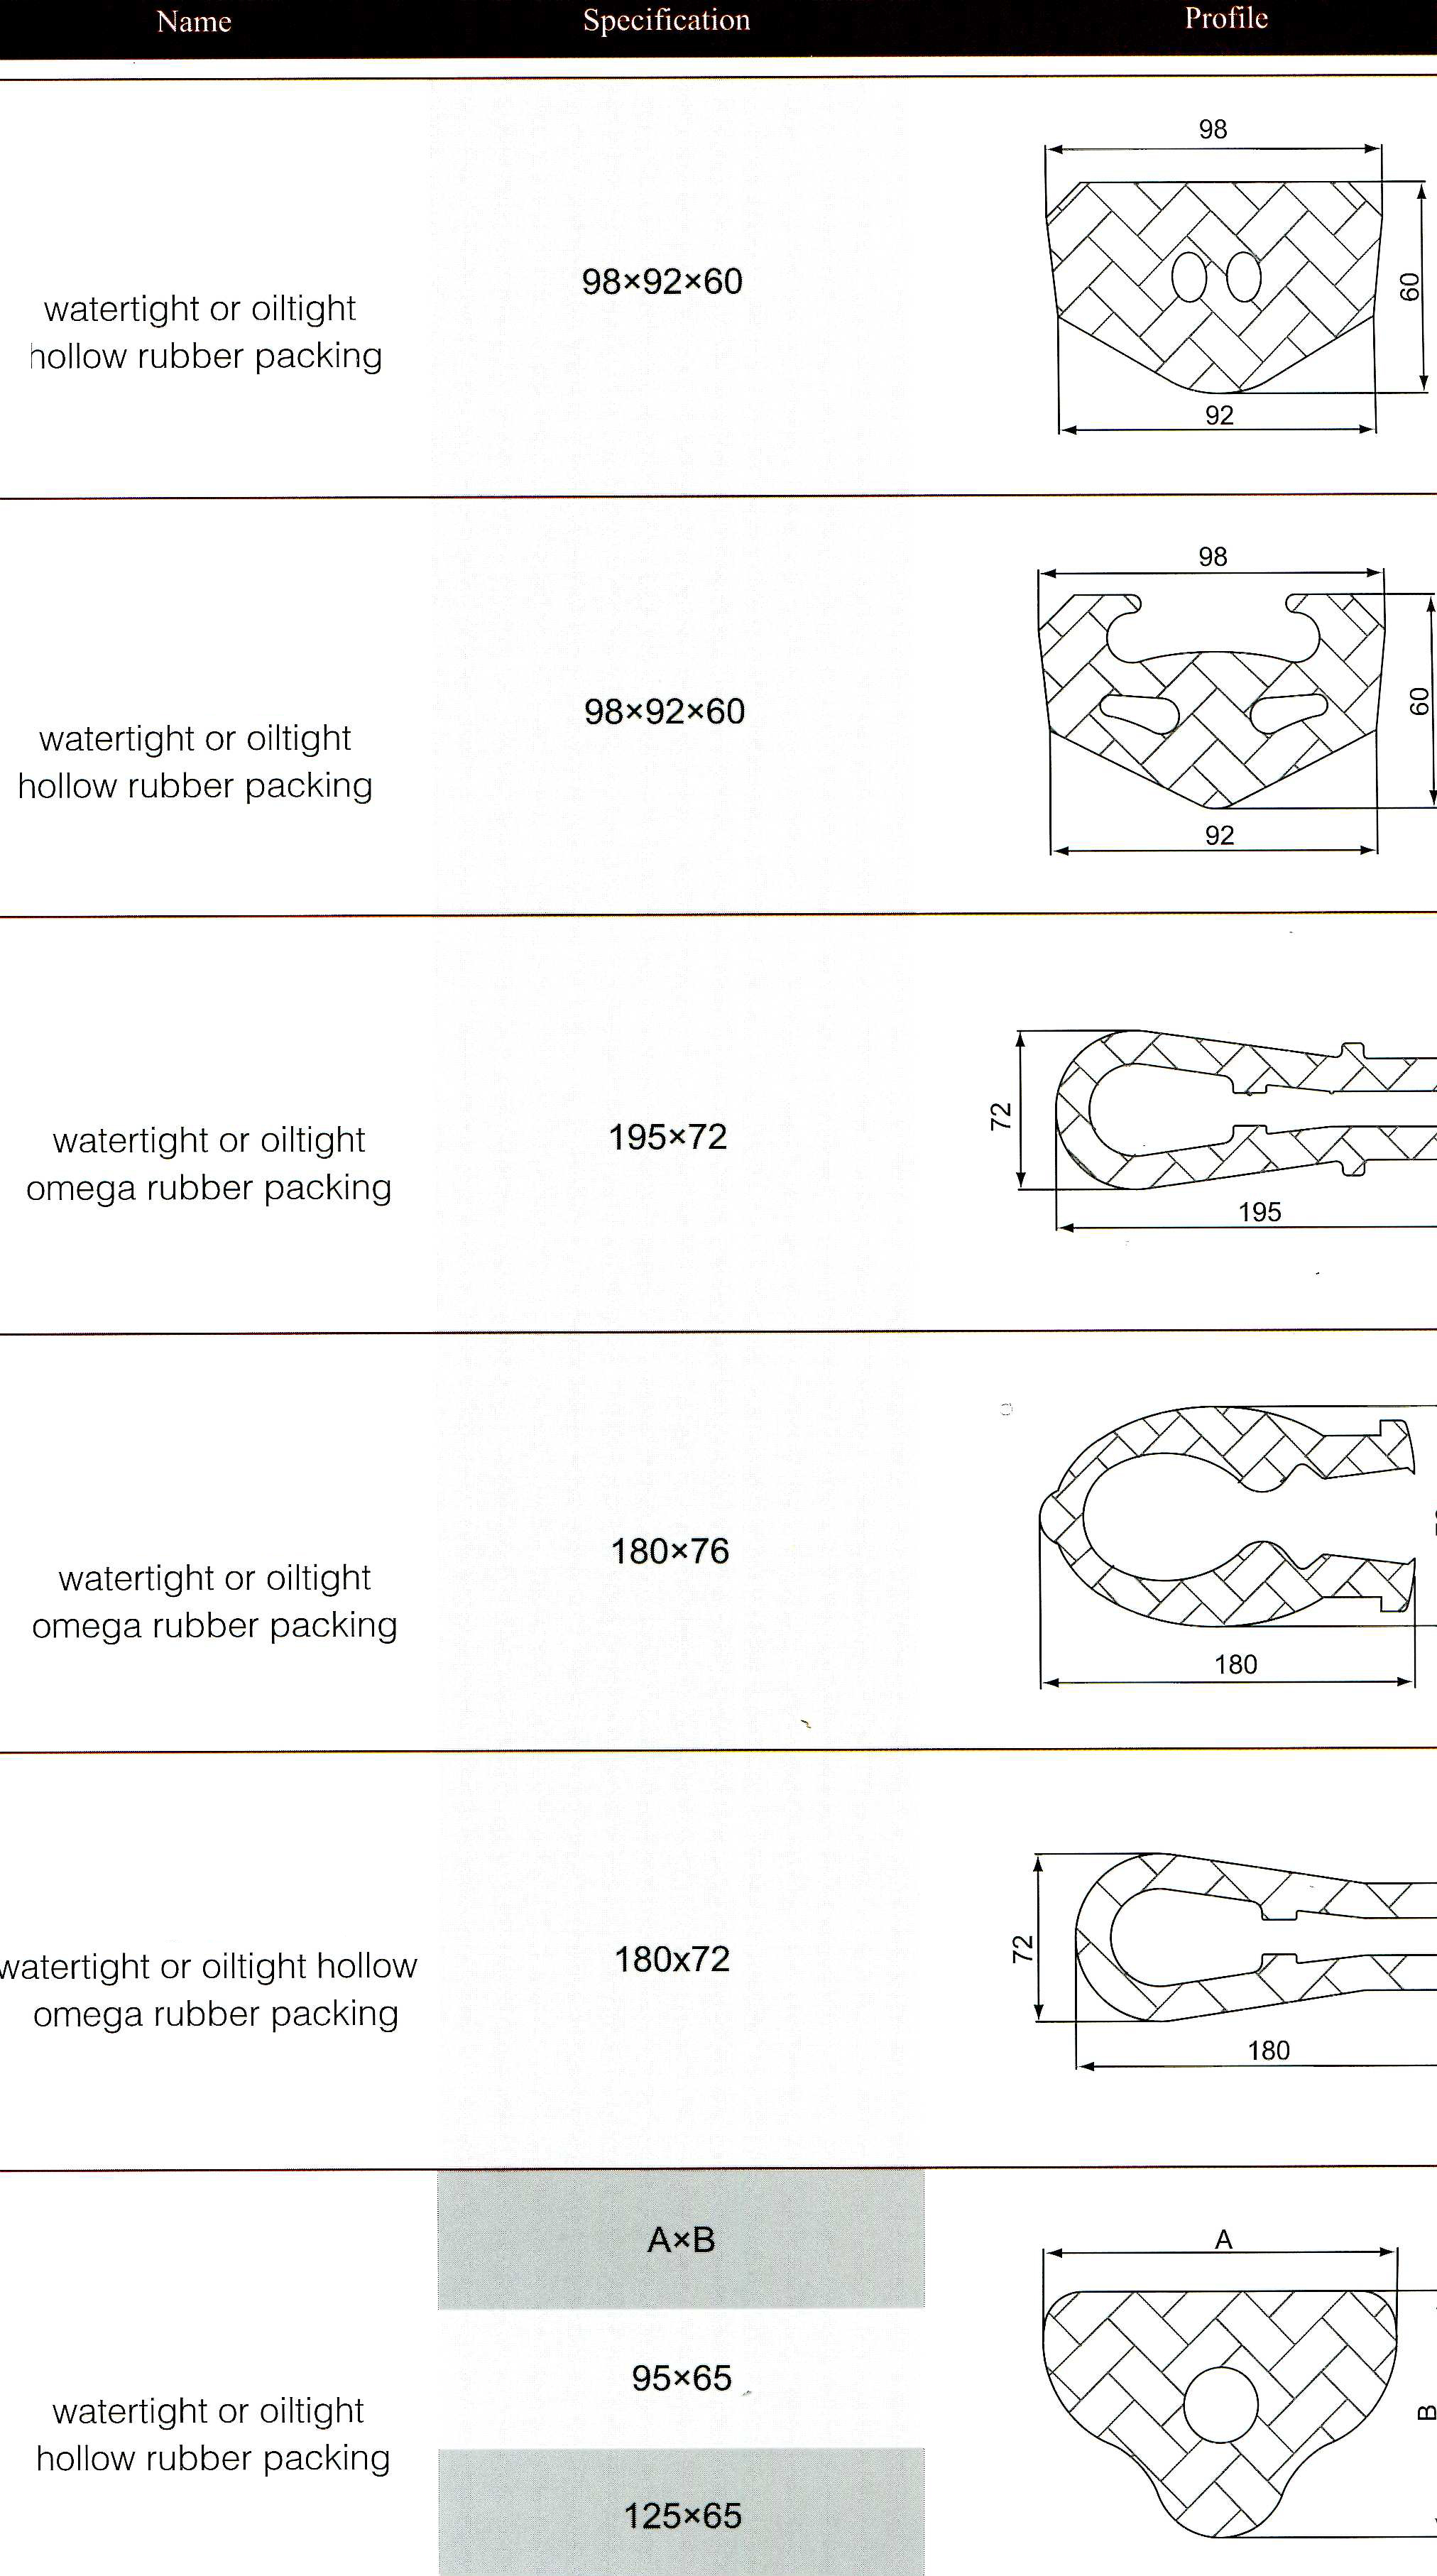 watertight or oiltight hollow rubber packing 